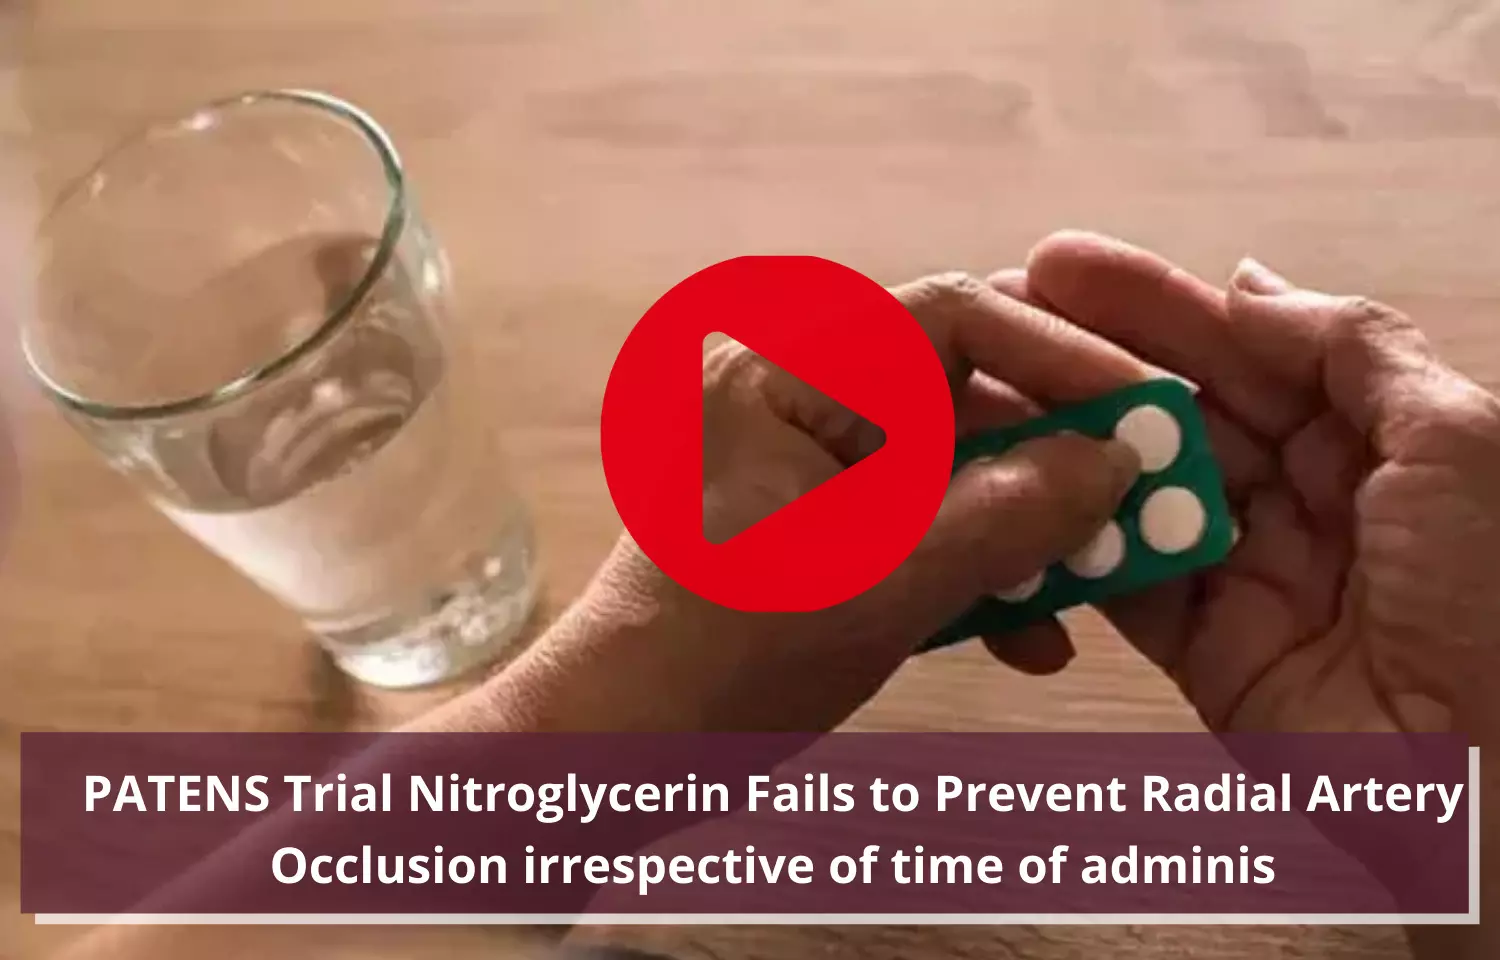 PATENS Trial Nitroglycerin Fails to Prevent Radial Artery Occlusion irrespective of time of admins